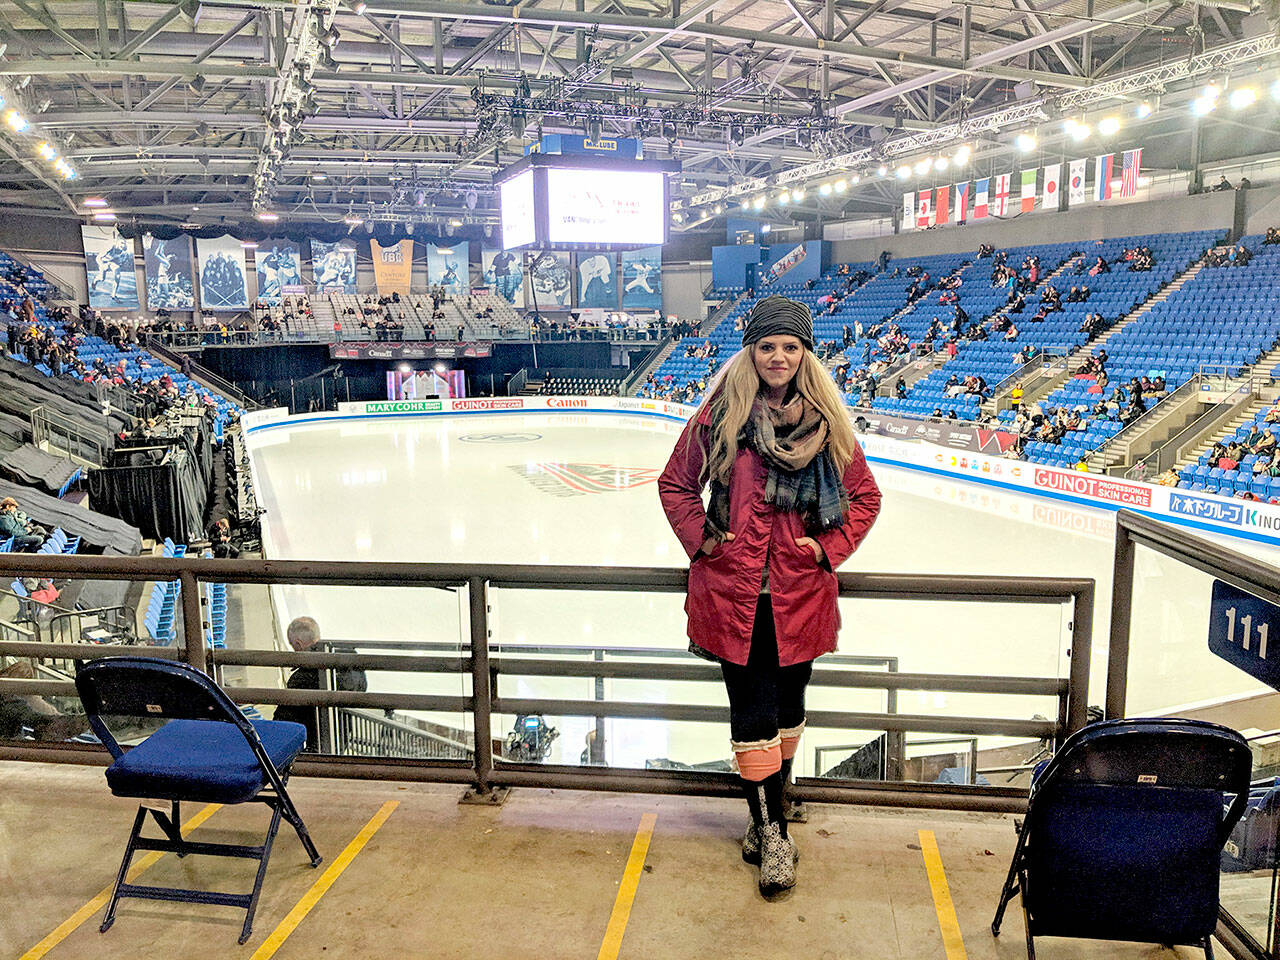 Jennifer Thomas, songwriter for Sequim, pictured in Vancouver, BC during the 2018-19 Grand Prix Final, where she watched Japan's Rika Kihira skate to a first place finish.  Kihira uses Thomas' song 